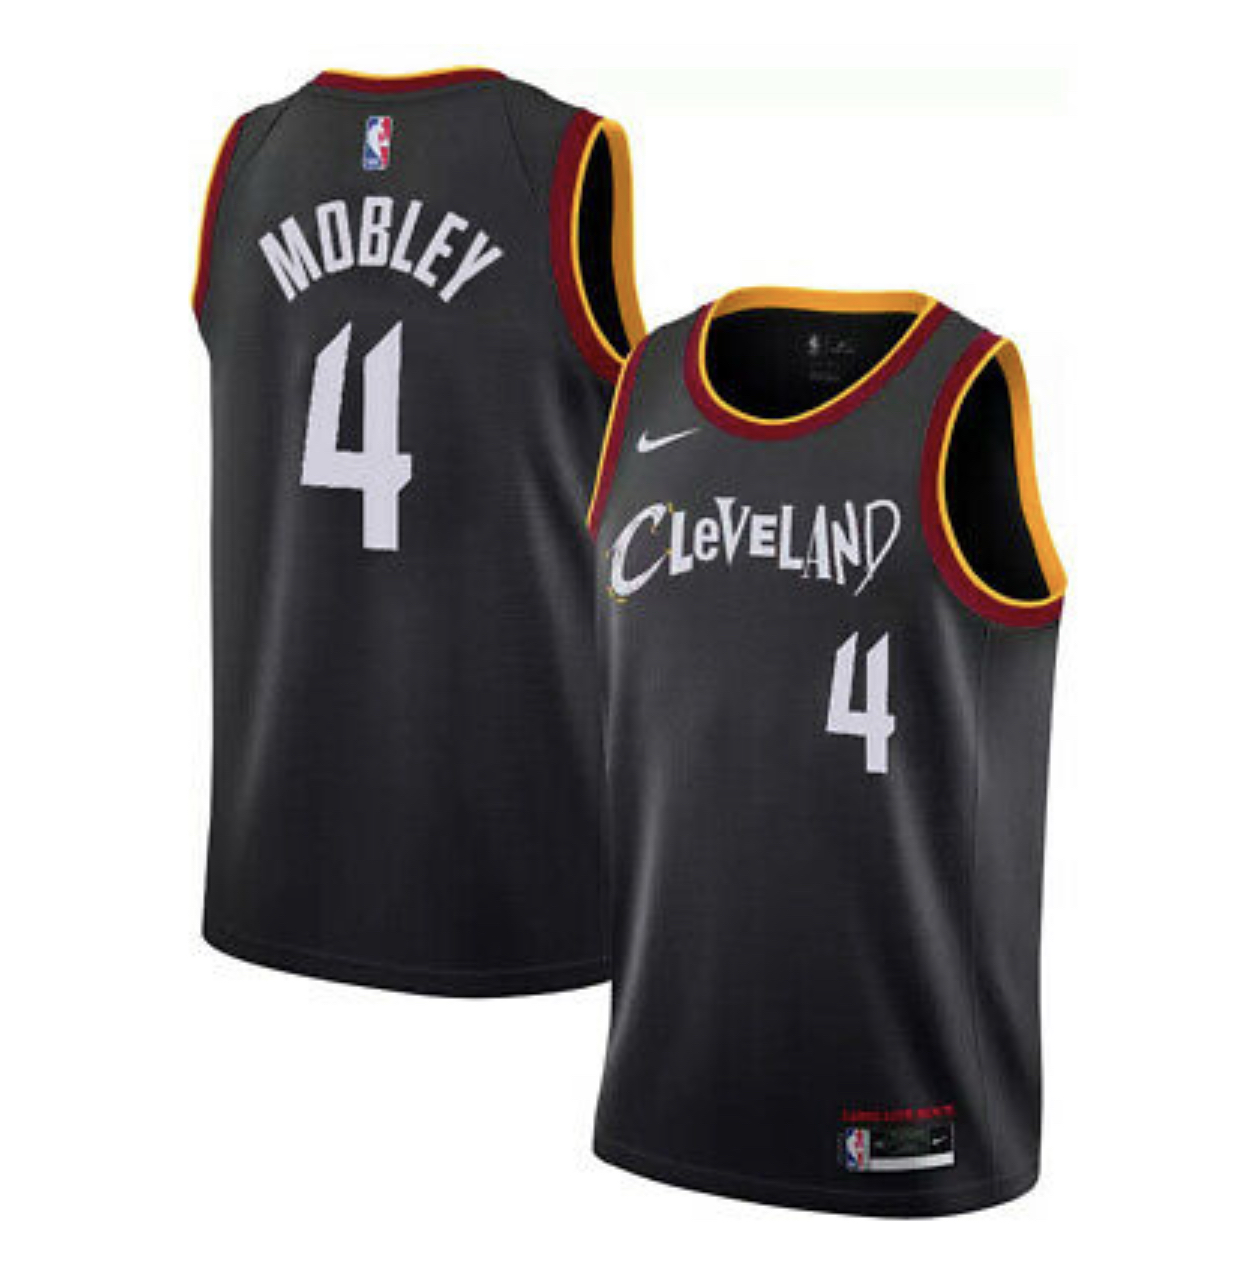 Evan Mobley Cleveland Cavaliers Jersey